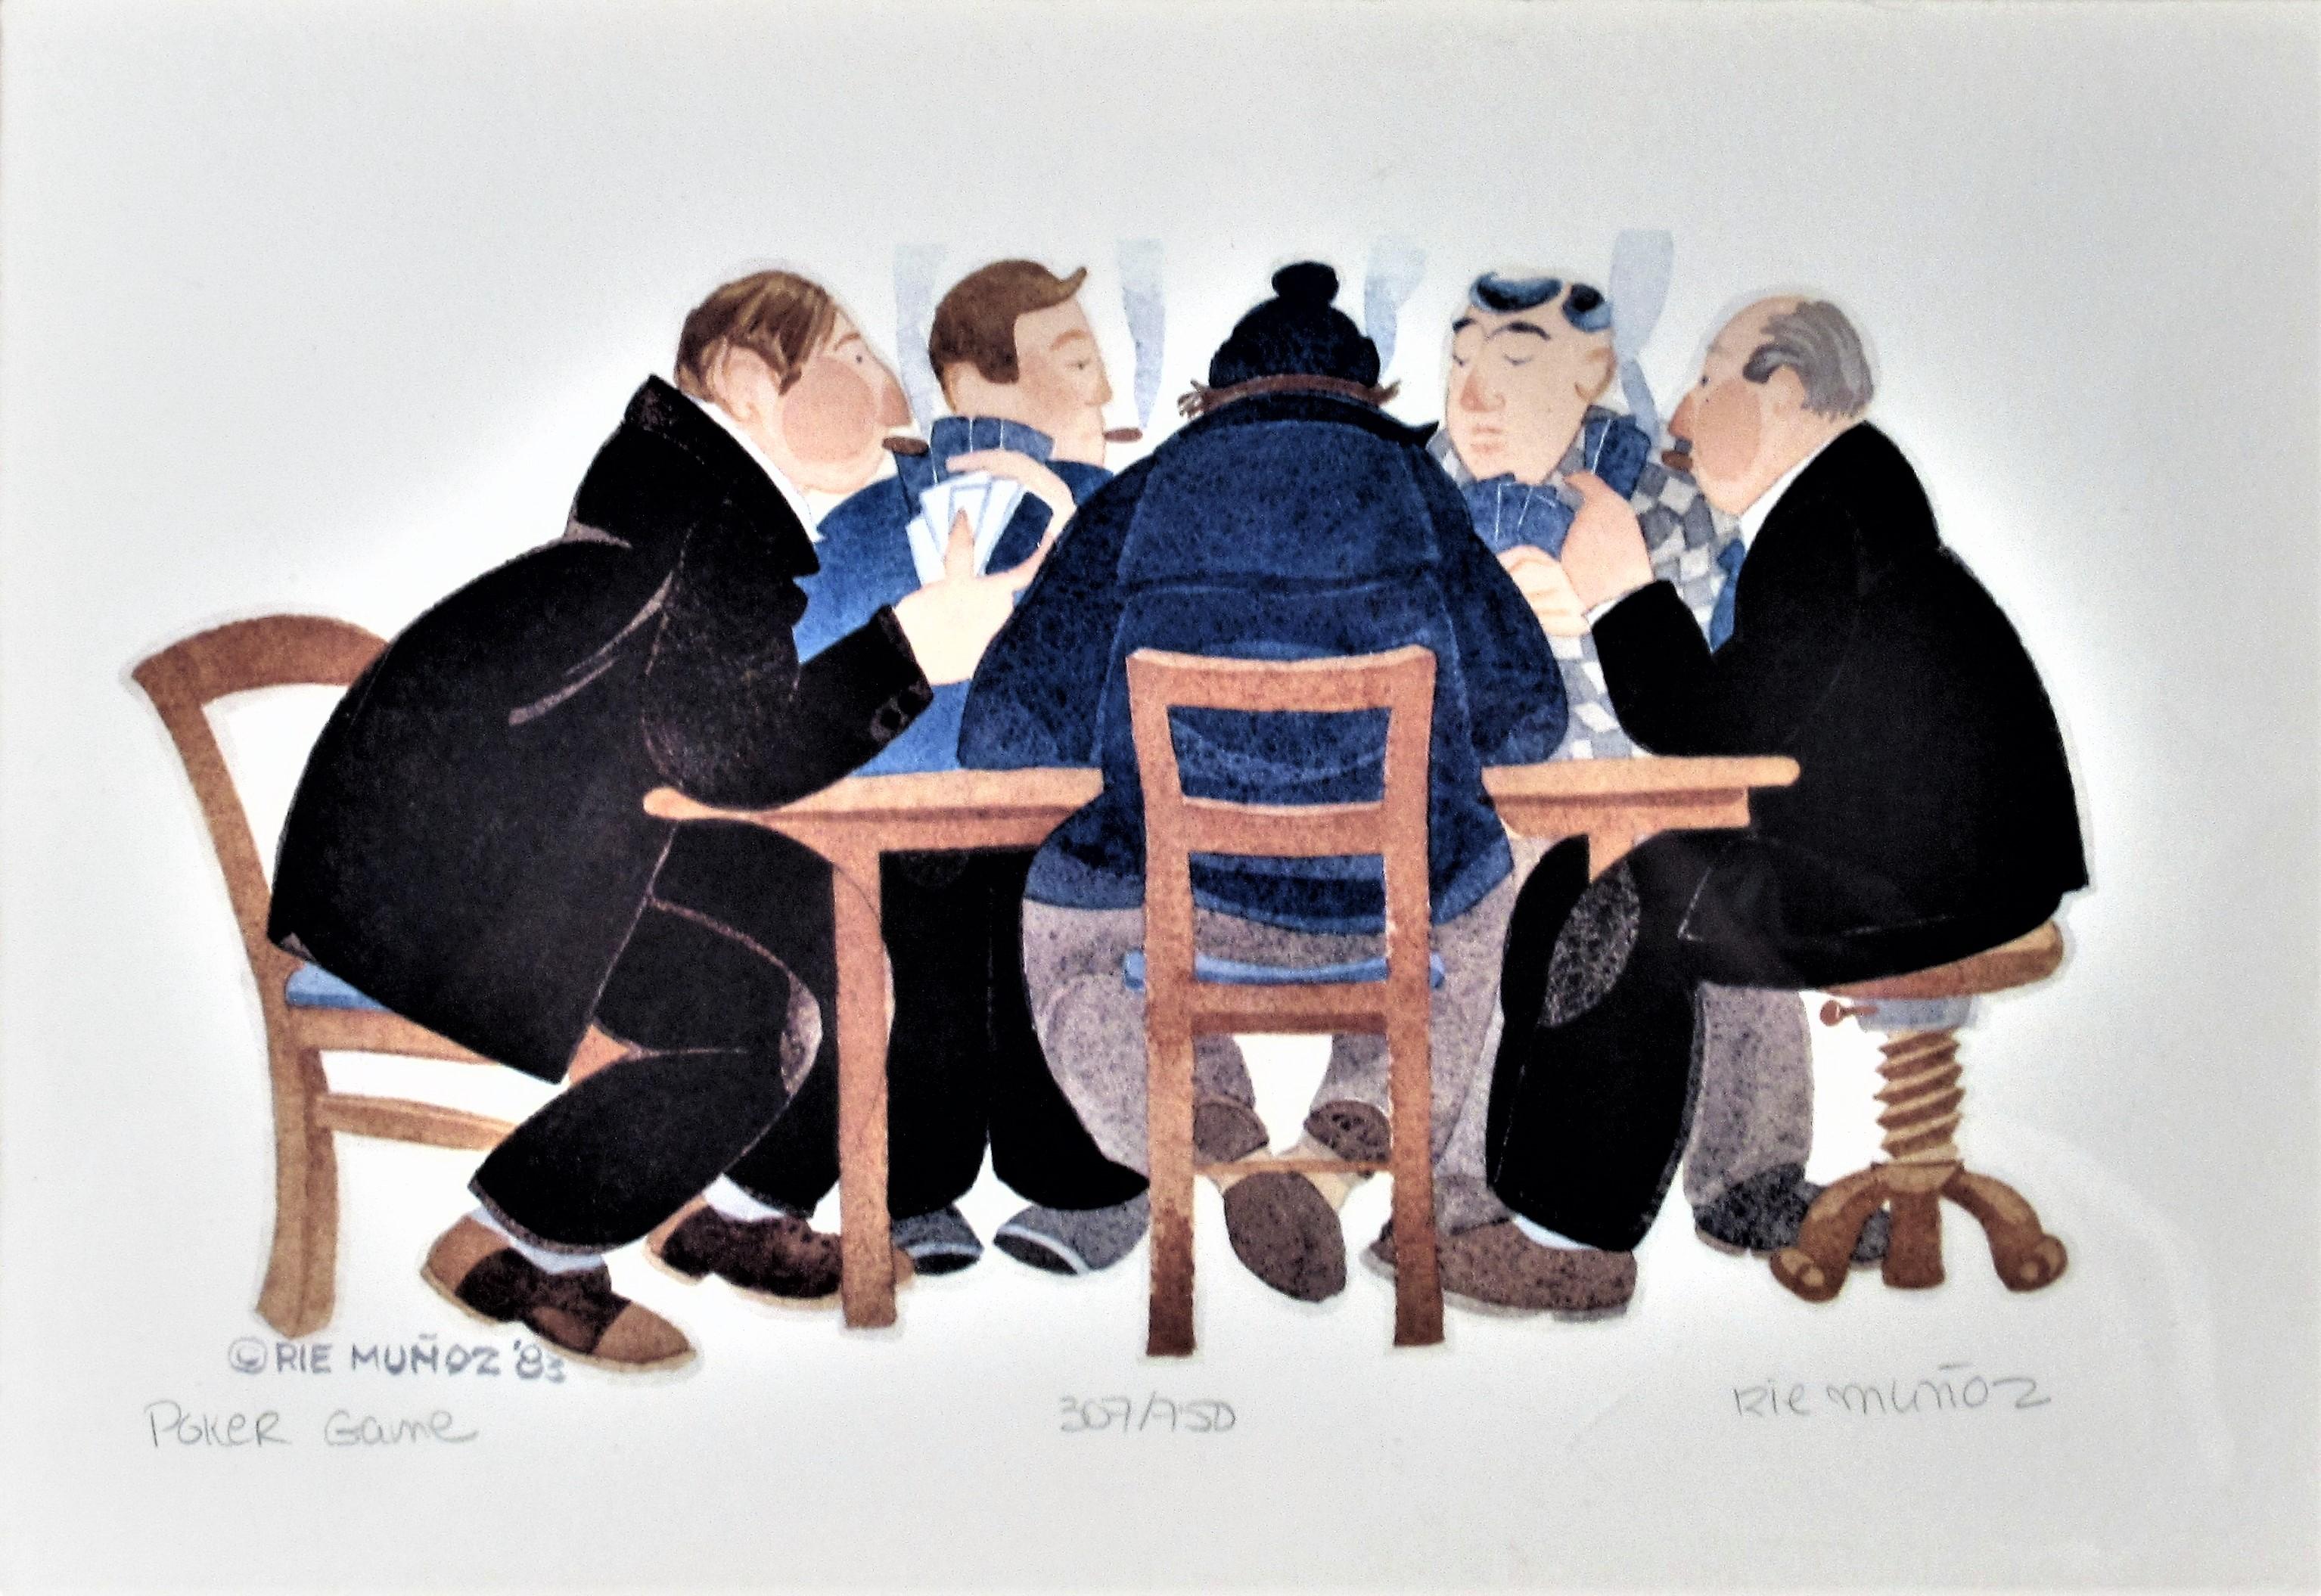 Poker Game - Print by Rie Munoz